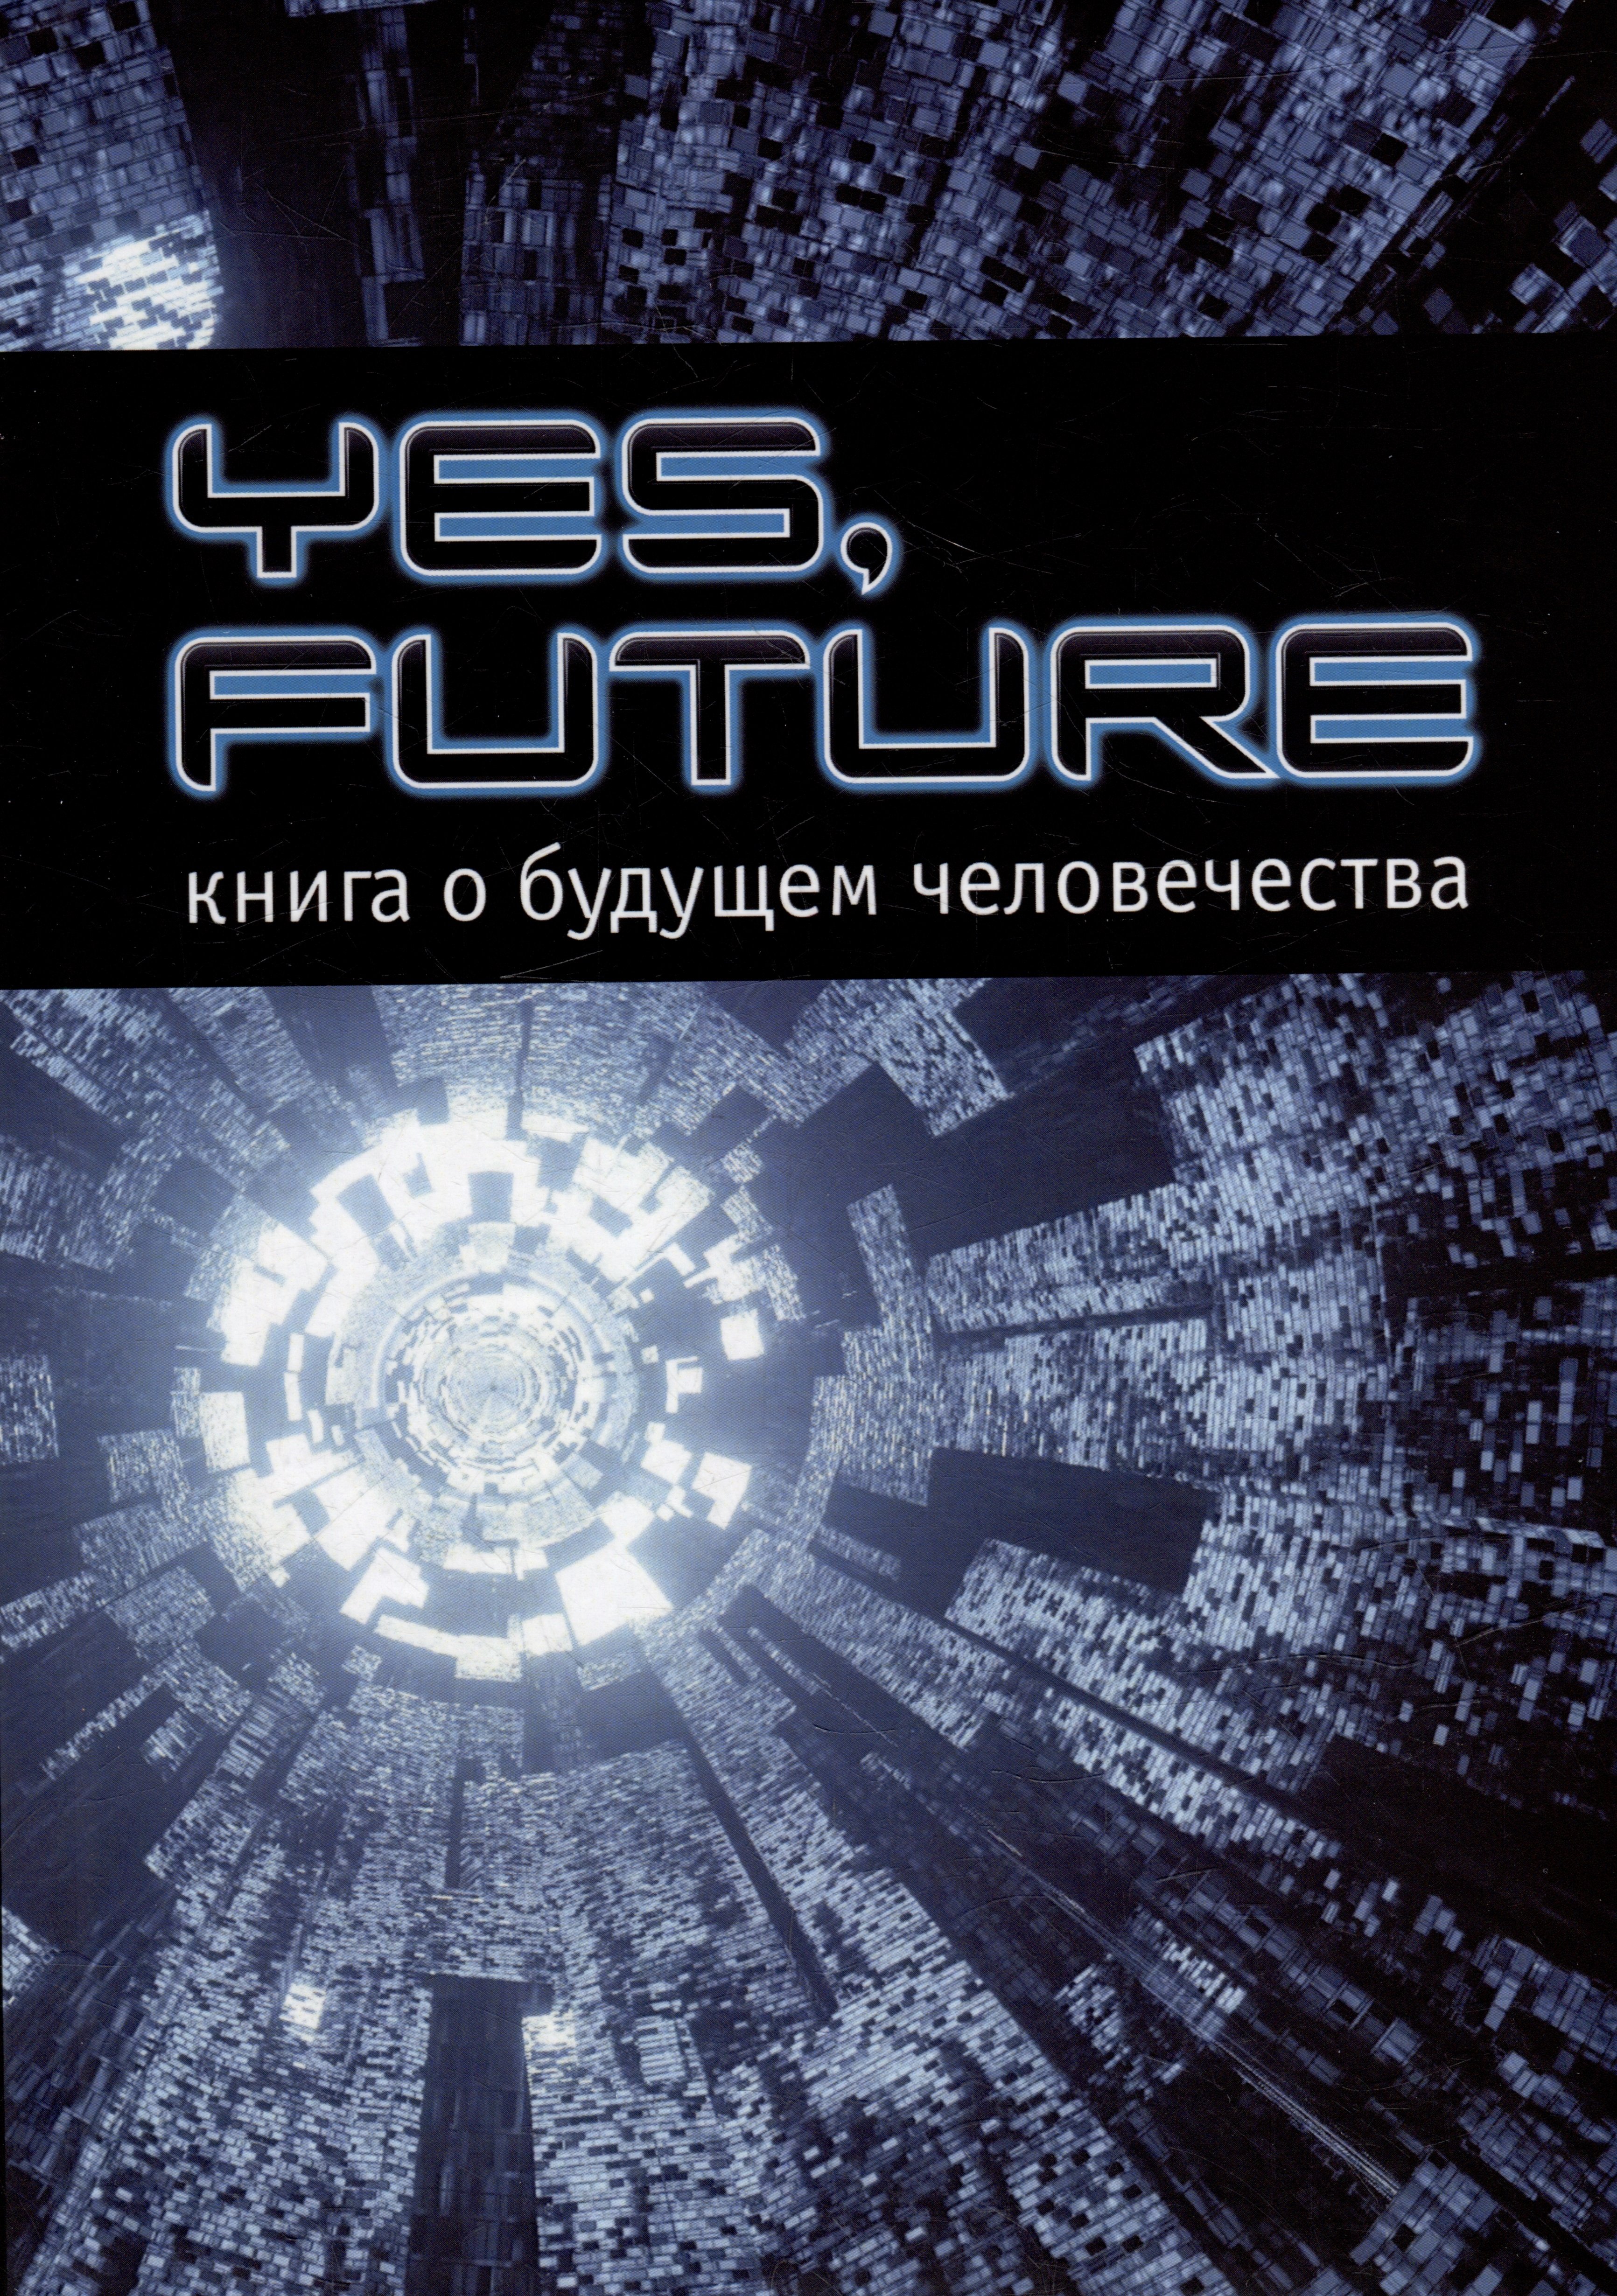 Yes, future.    